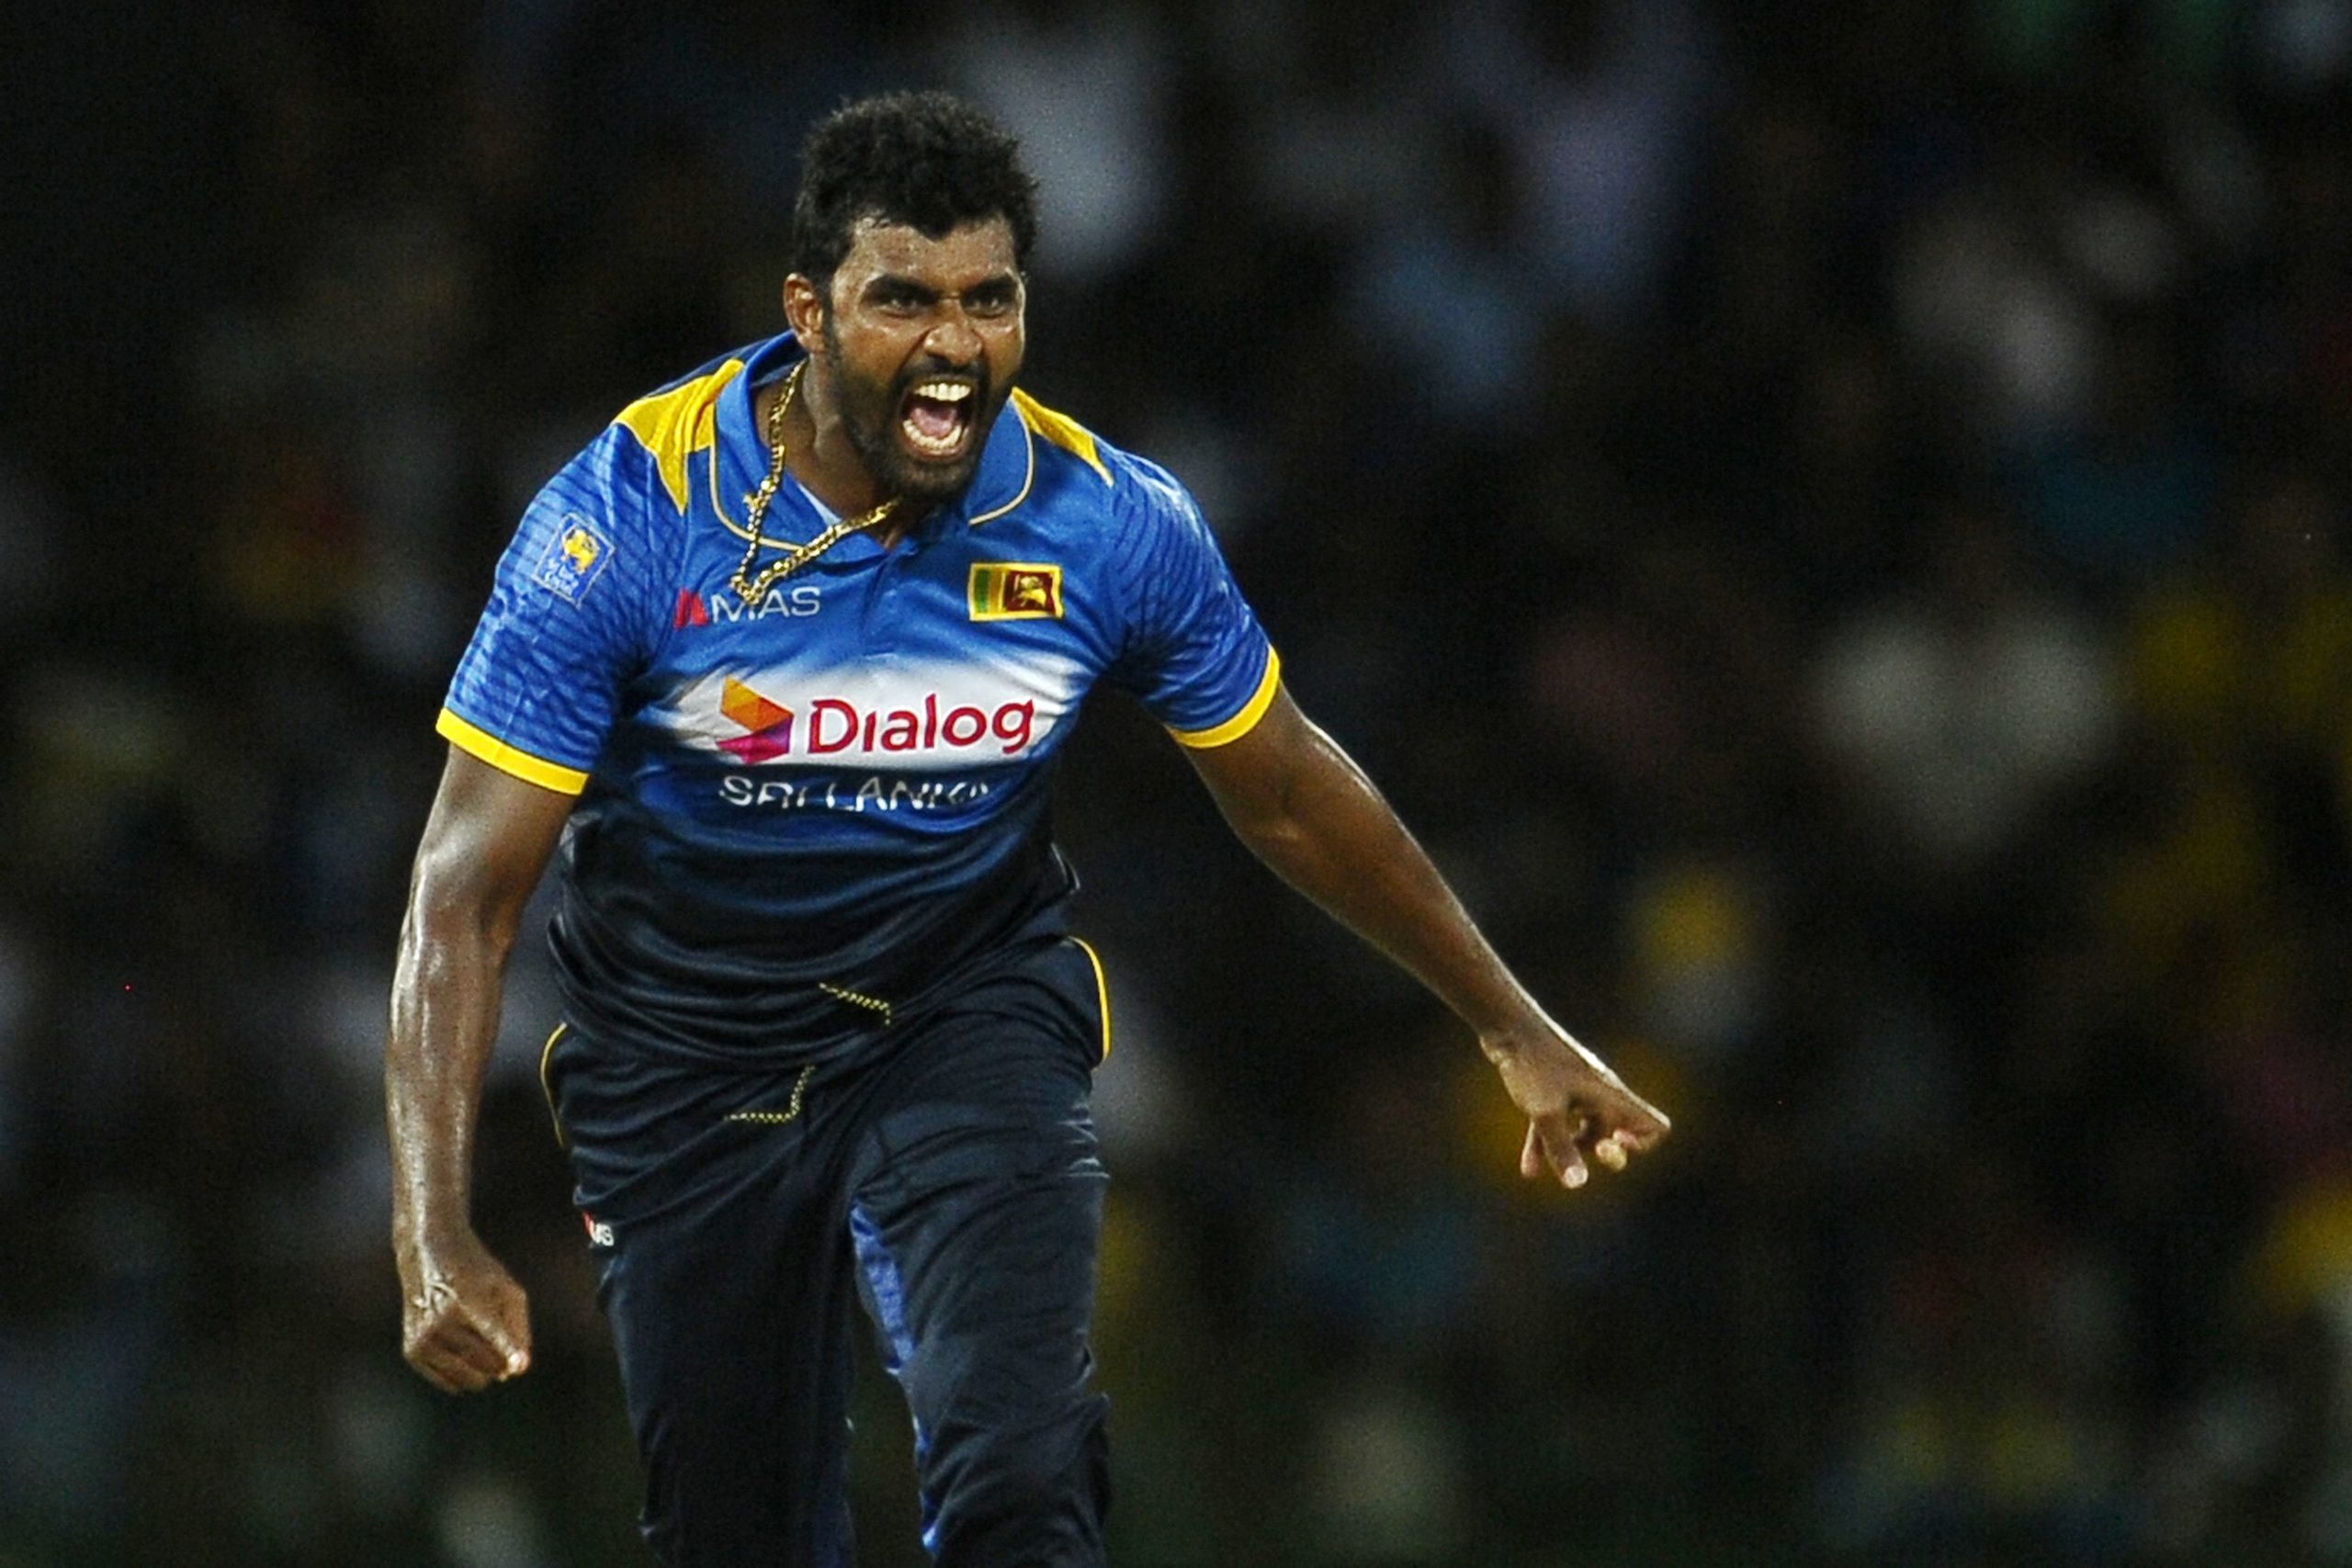 Thisara Perera was a bustling player who won international recognition